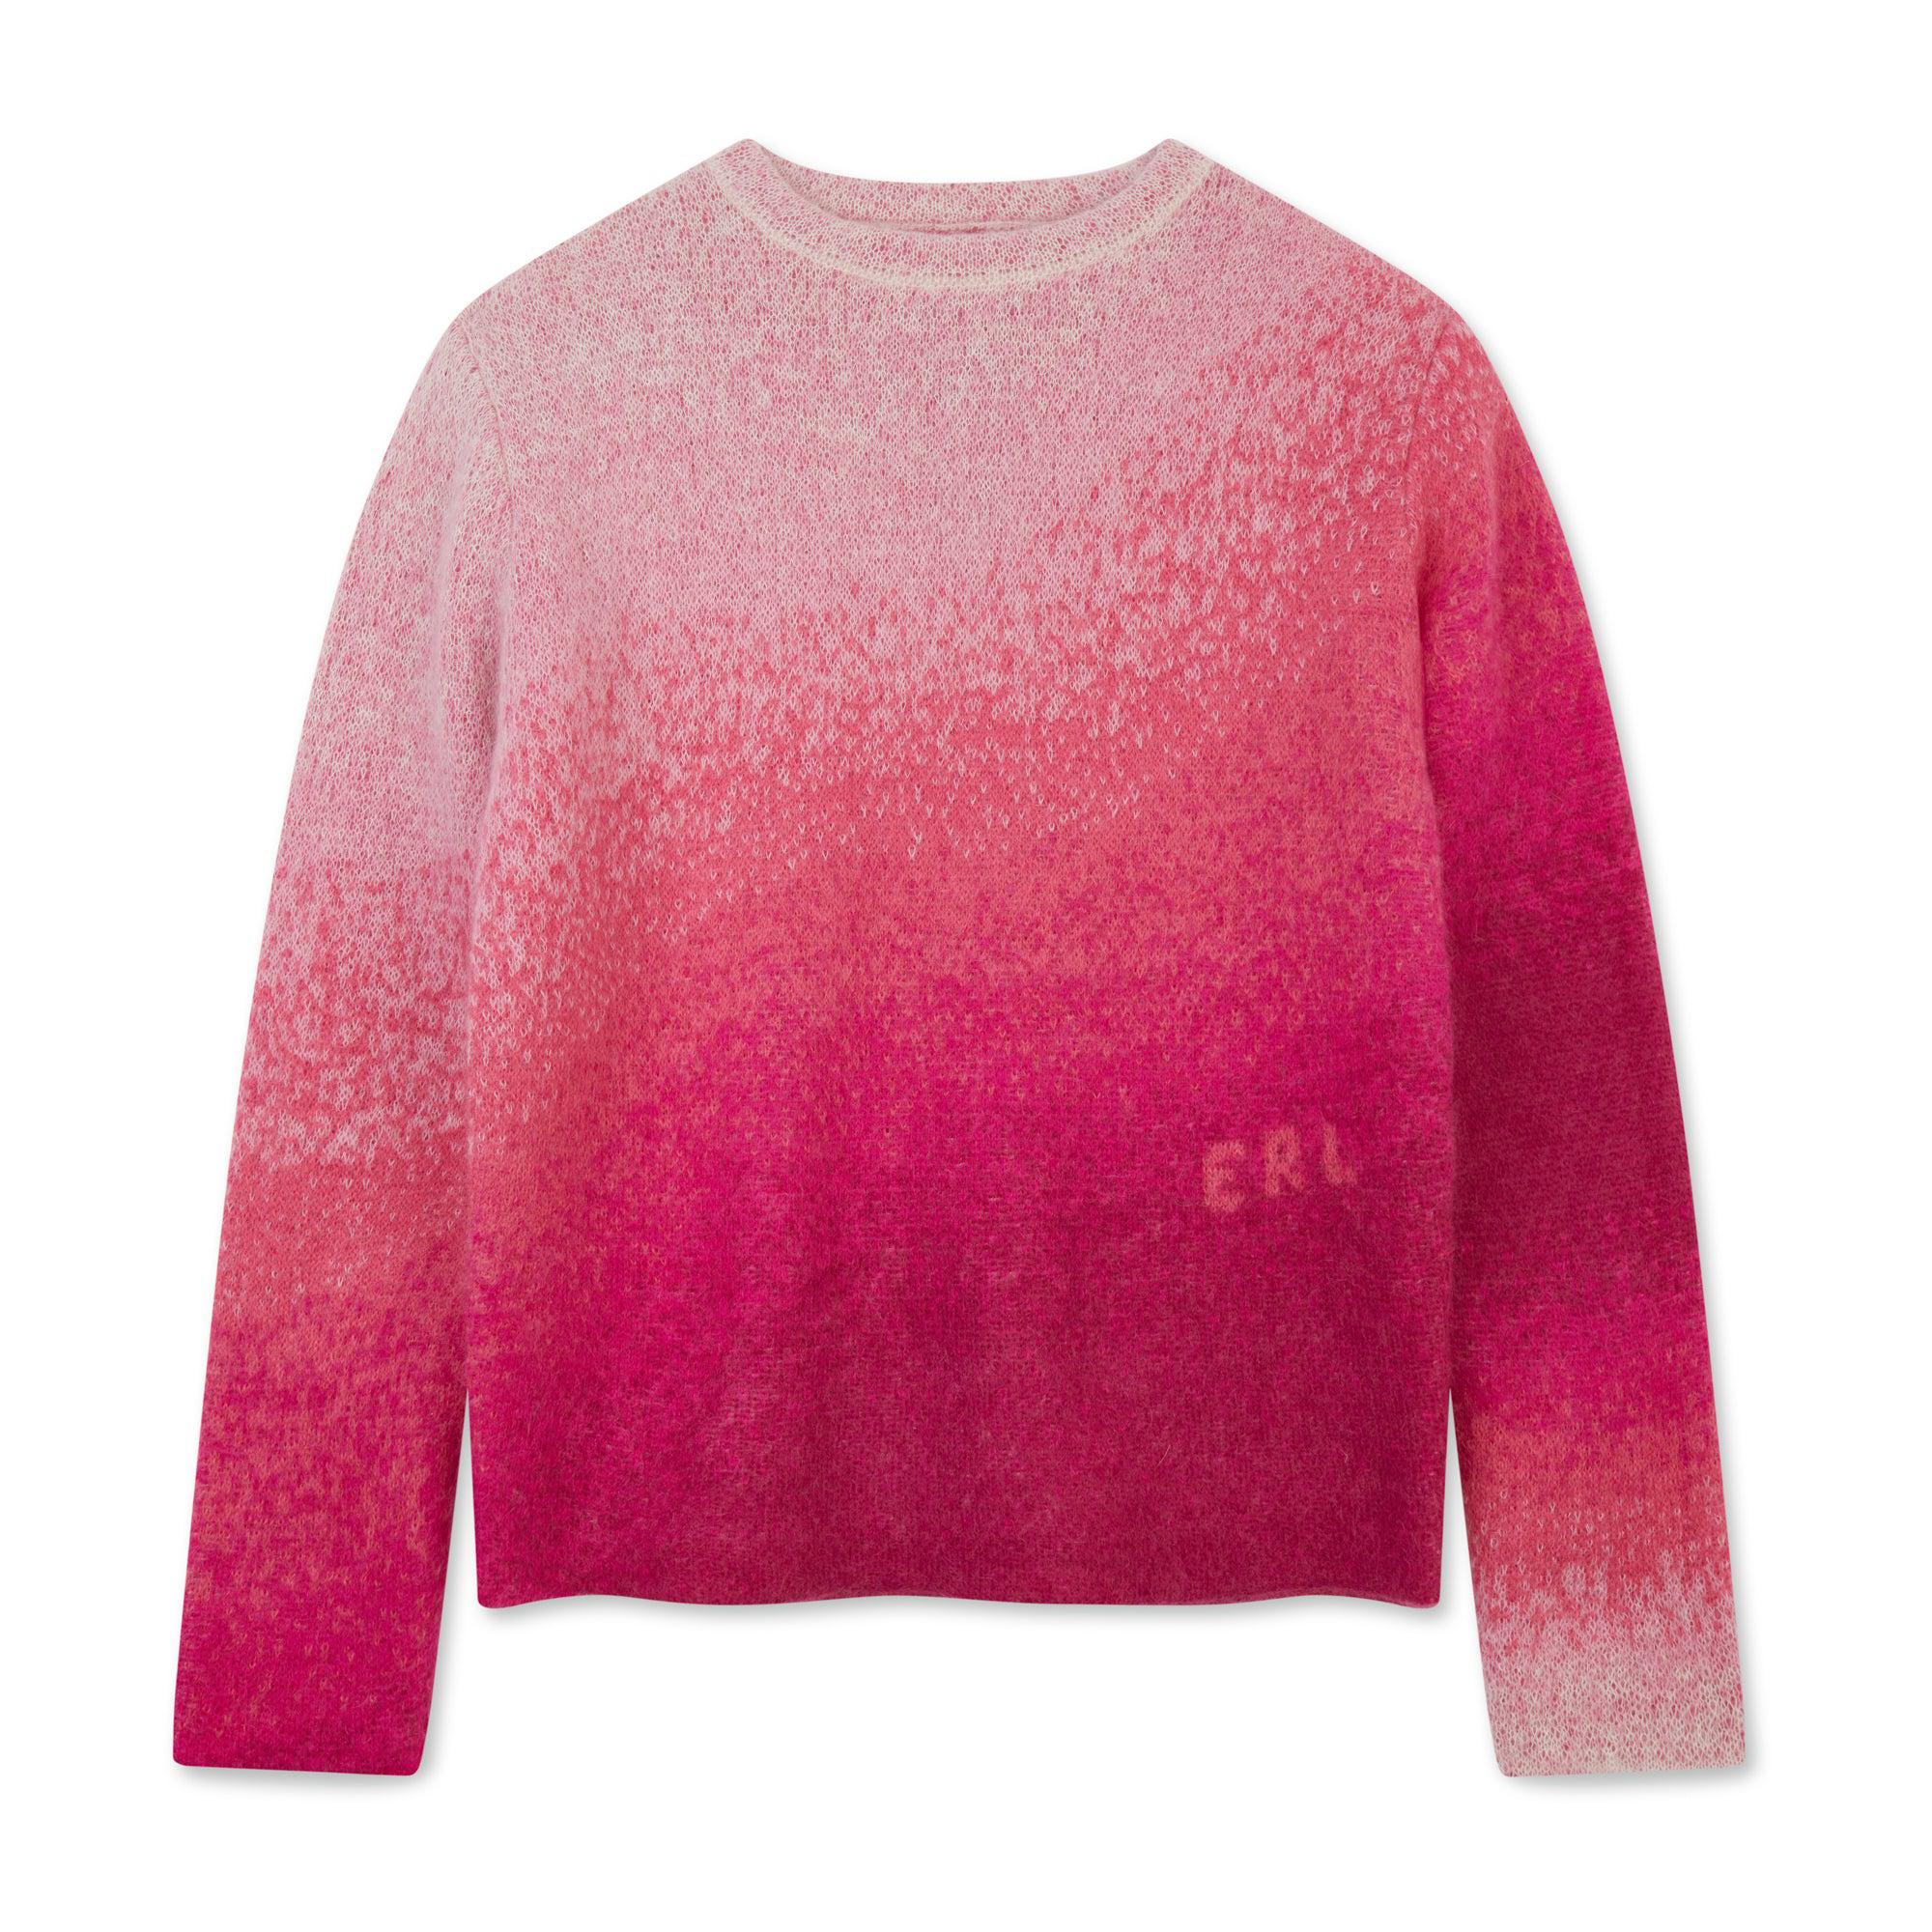 ERL Gradient Crew Neck Sweater (Pink) by ERL